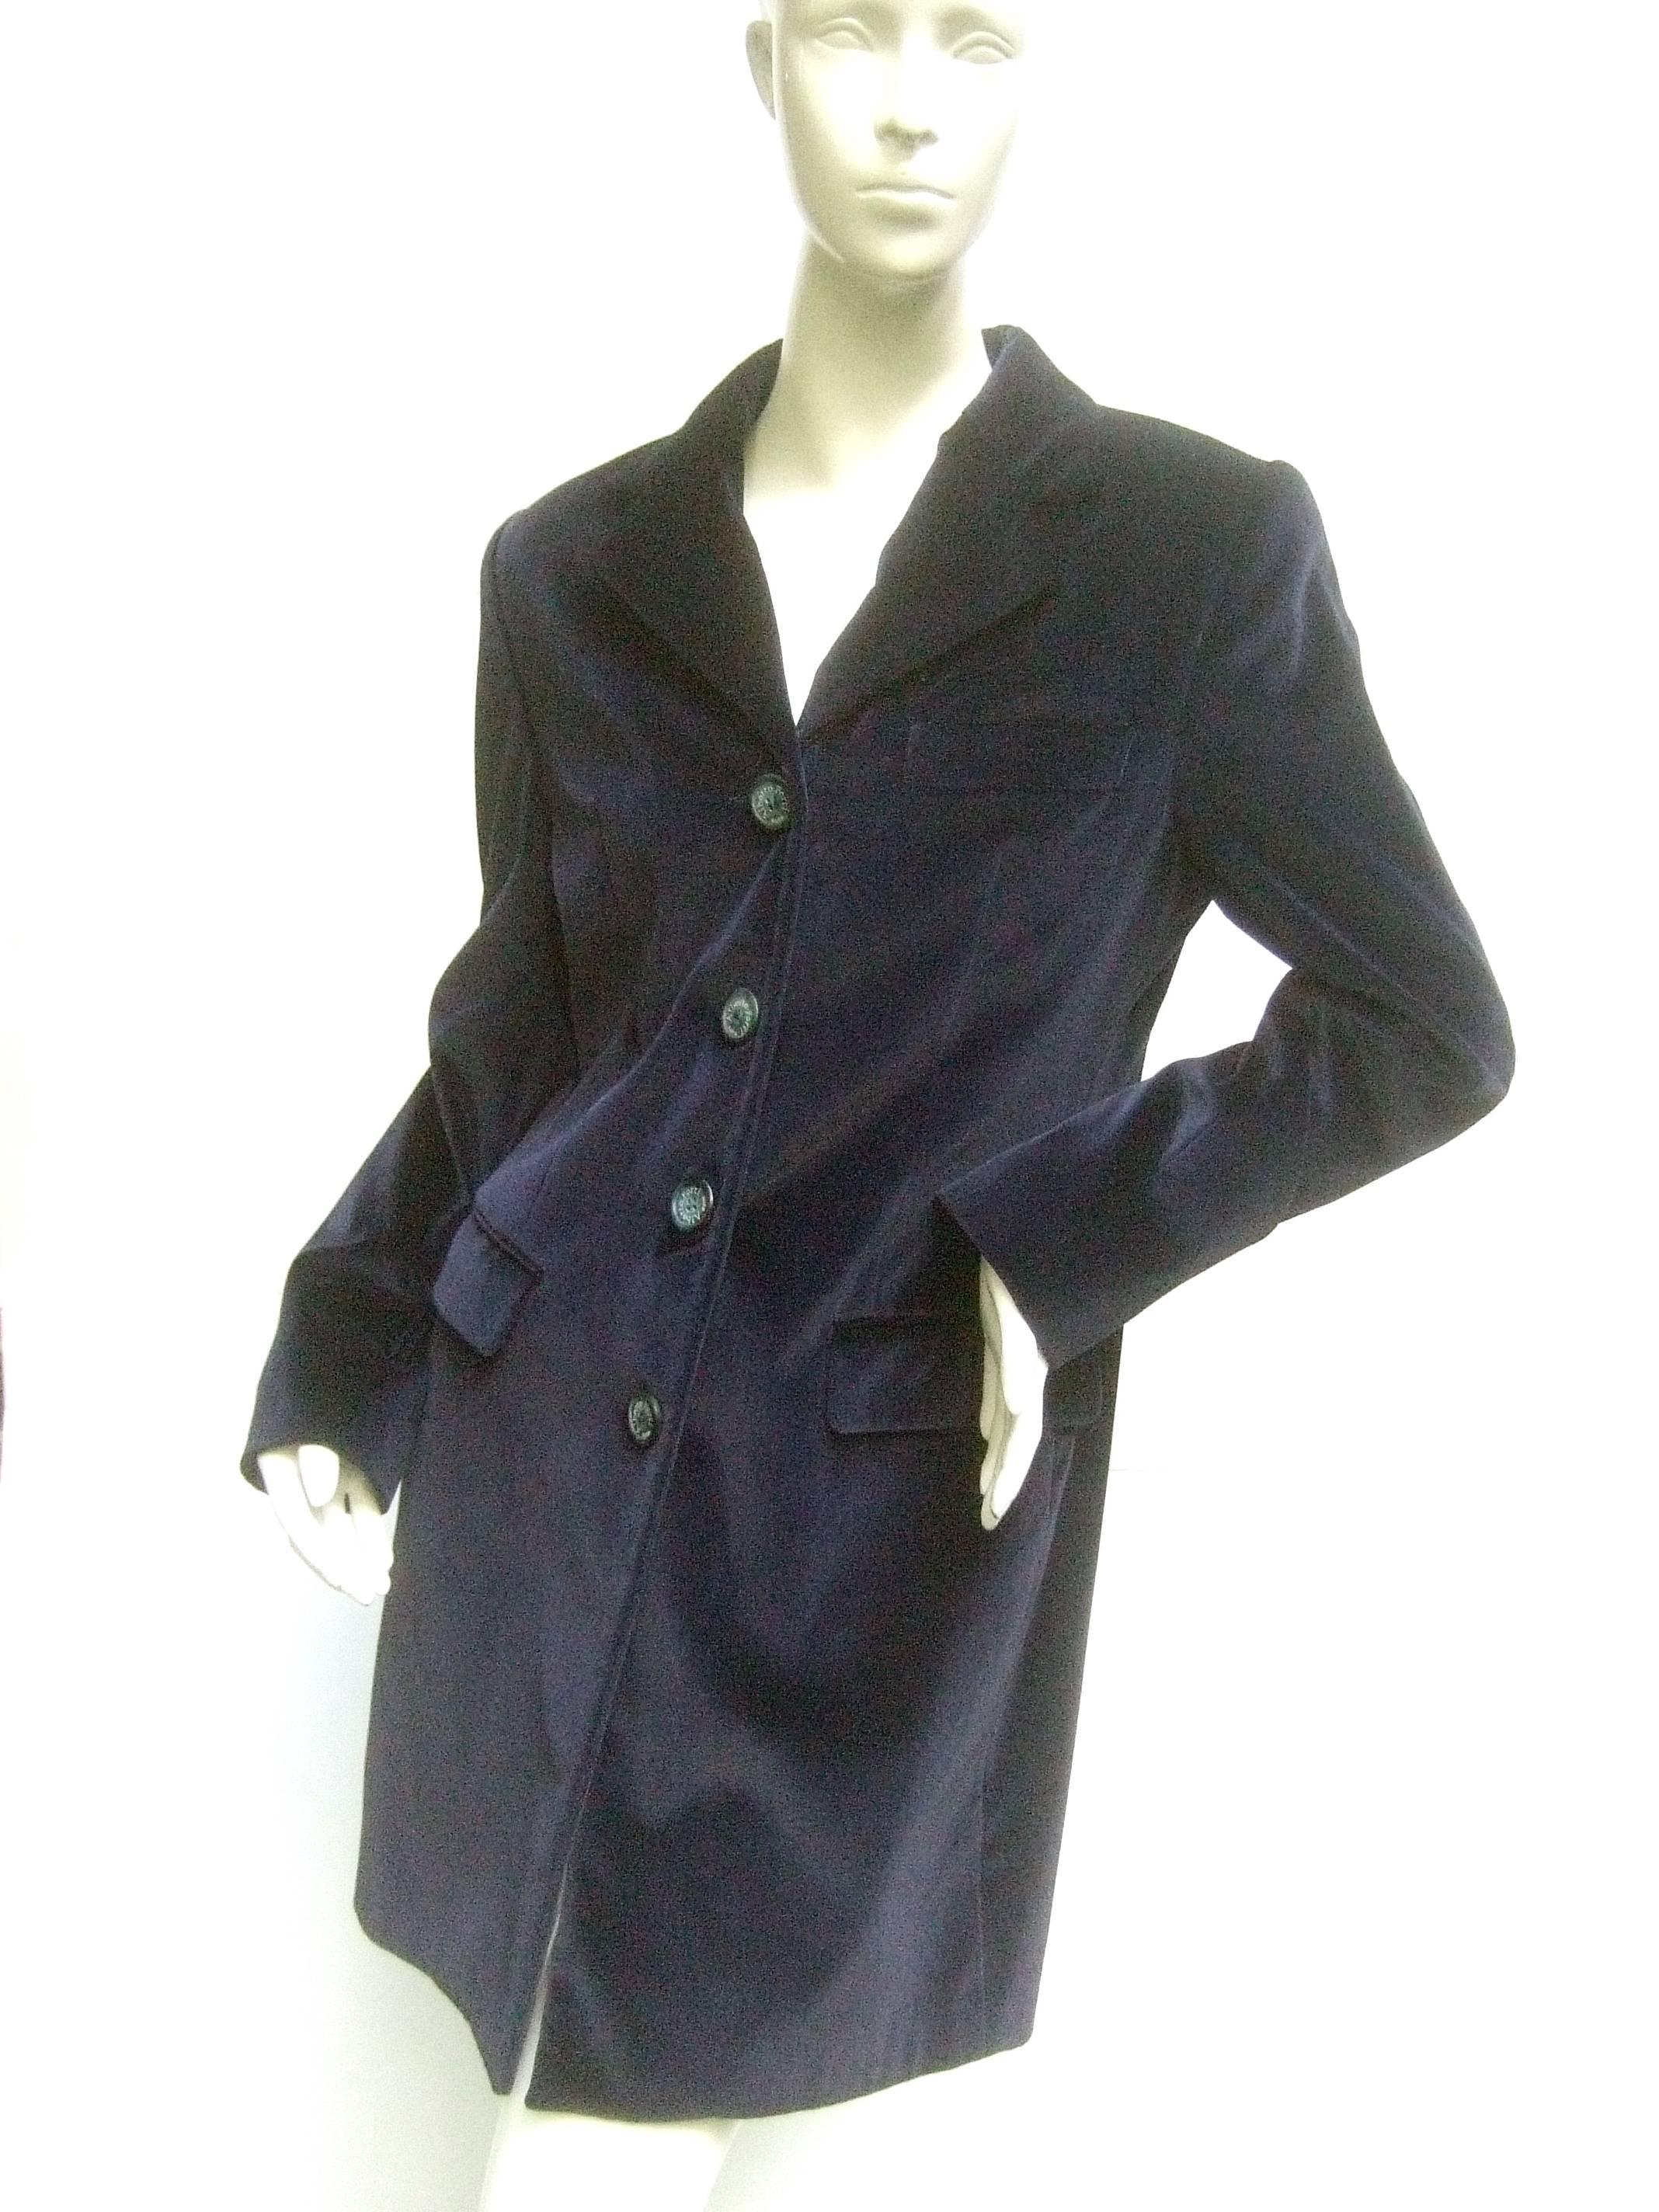 Alberto Forti Roma midnight blue cotton velvet coat 
The stylish 3/4 length Italian coat is designed with 
plush dark blue cotton velvet

Adorned with four large resin buttons stamped
Alberto Forti Roma. Designed with a single chest
pocket and